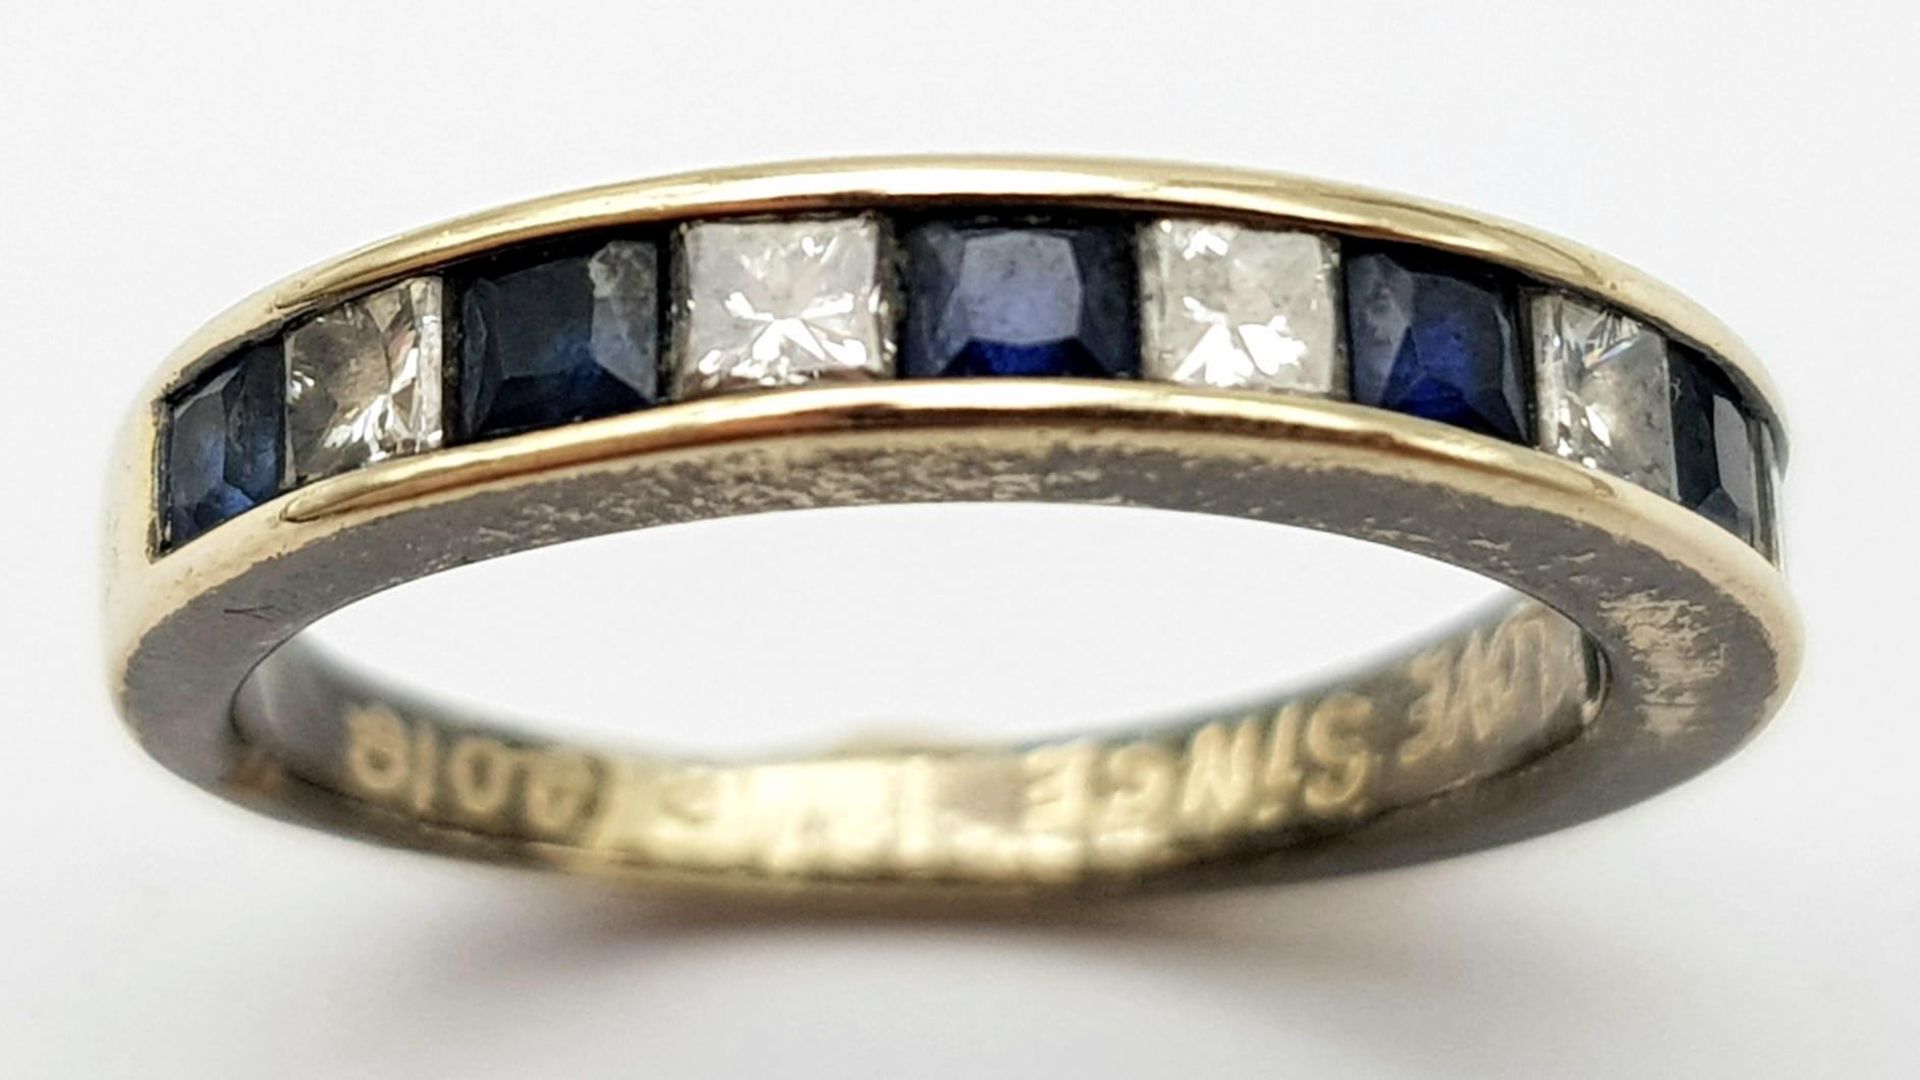 An 18K Gold Diamond and Sapphire Half-Eternity Ring. Size K. 3.1g total weight. Ref: 016637 - Image 2 of 5